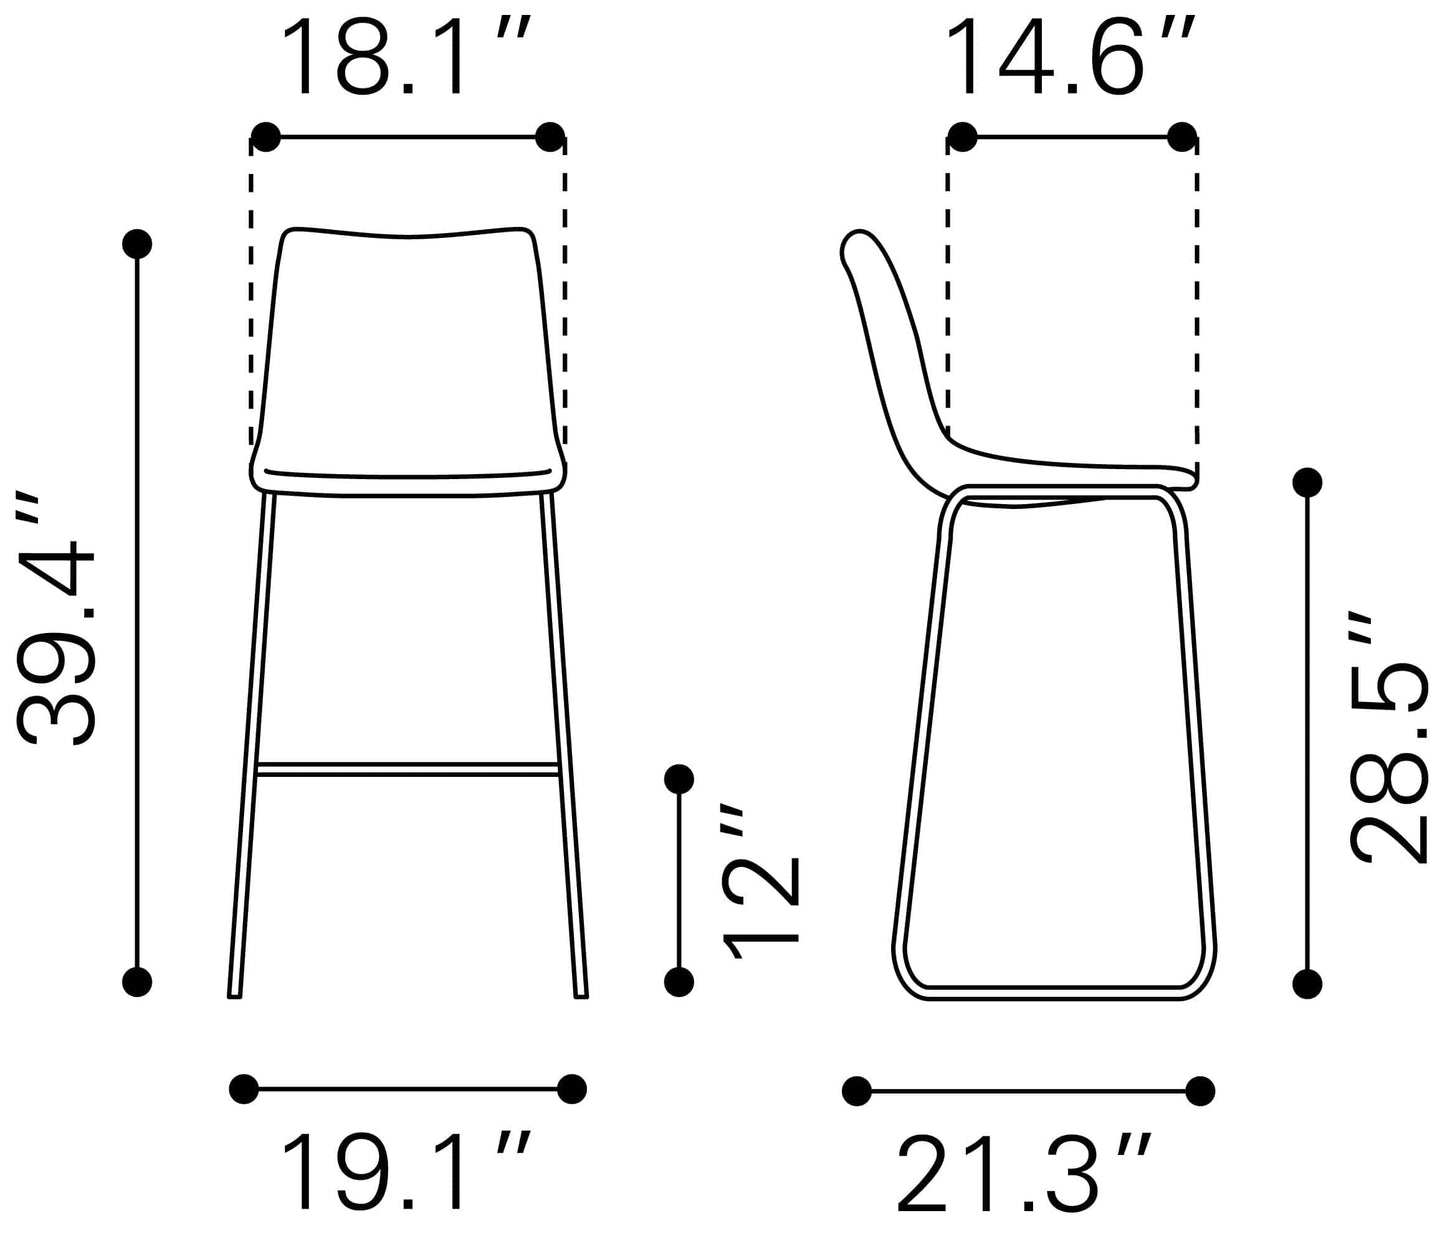 Dimensions of Smart Stools